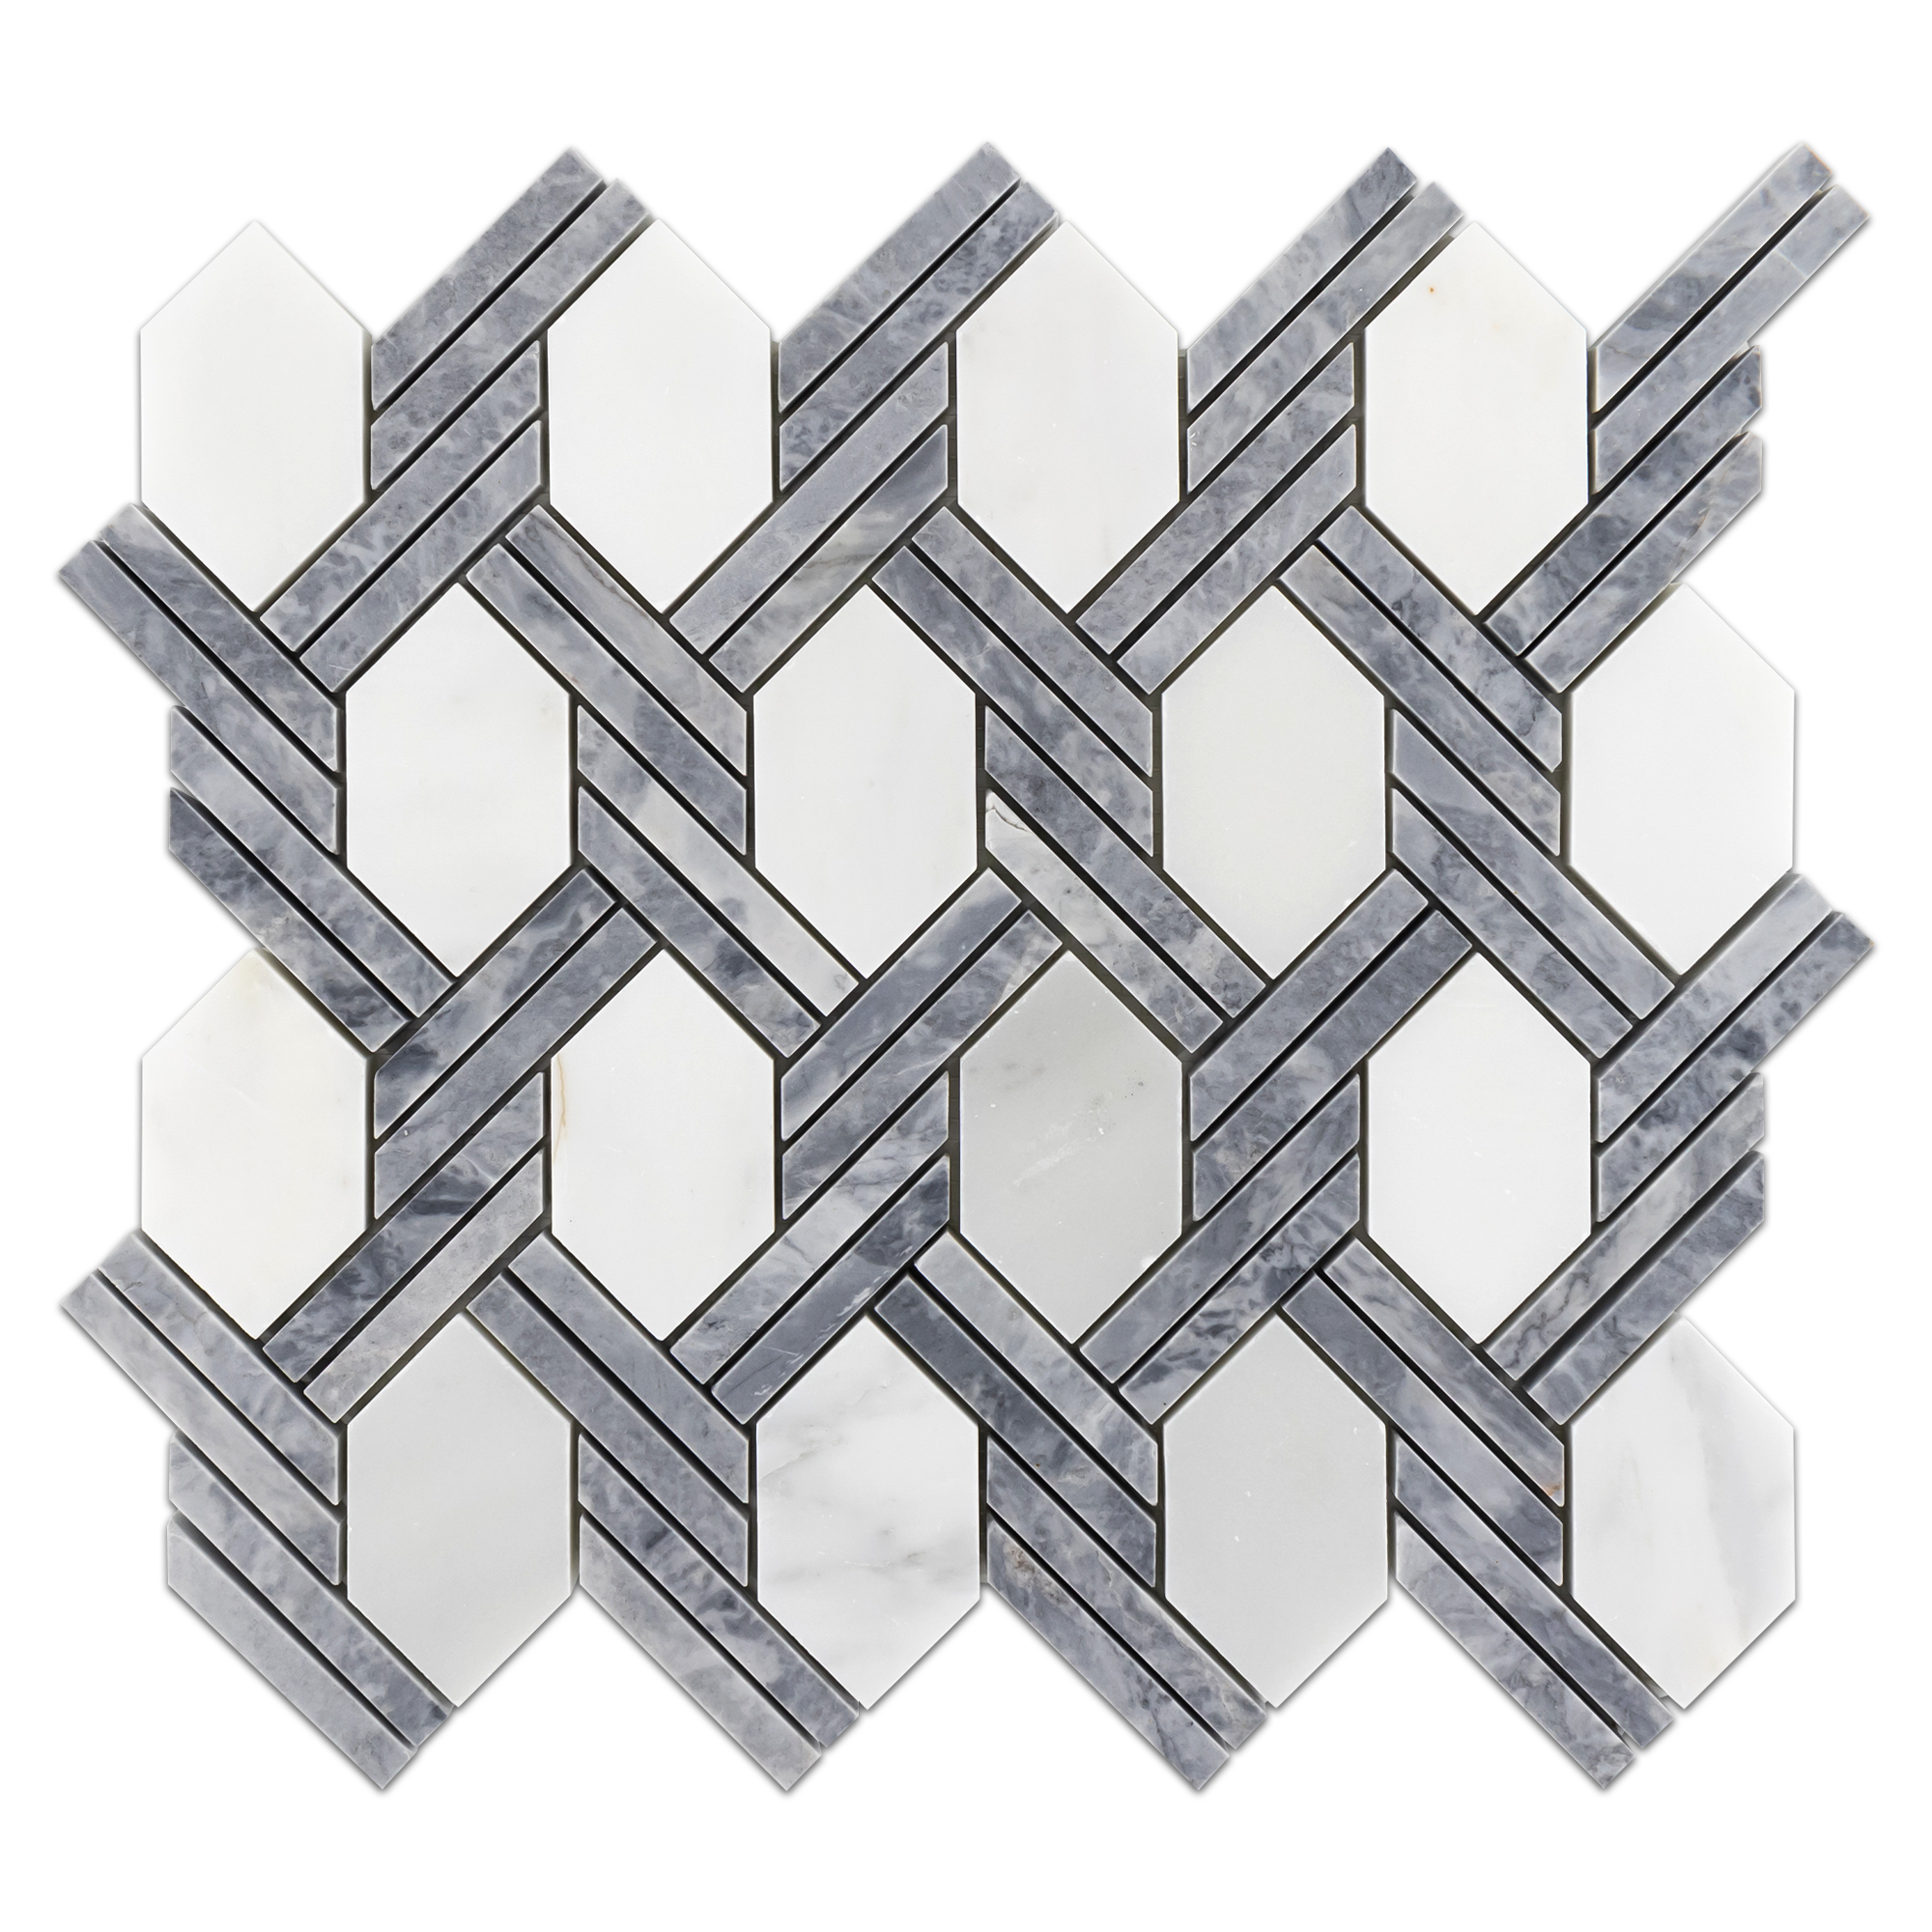 Elon Pacific Gray Pearl White Marble Braided Picket Field Mosaic 11.625x12.875x0.375 Polished AM5104P Surface Group International Product